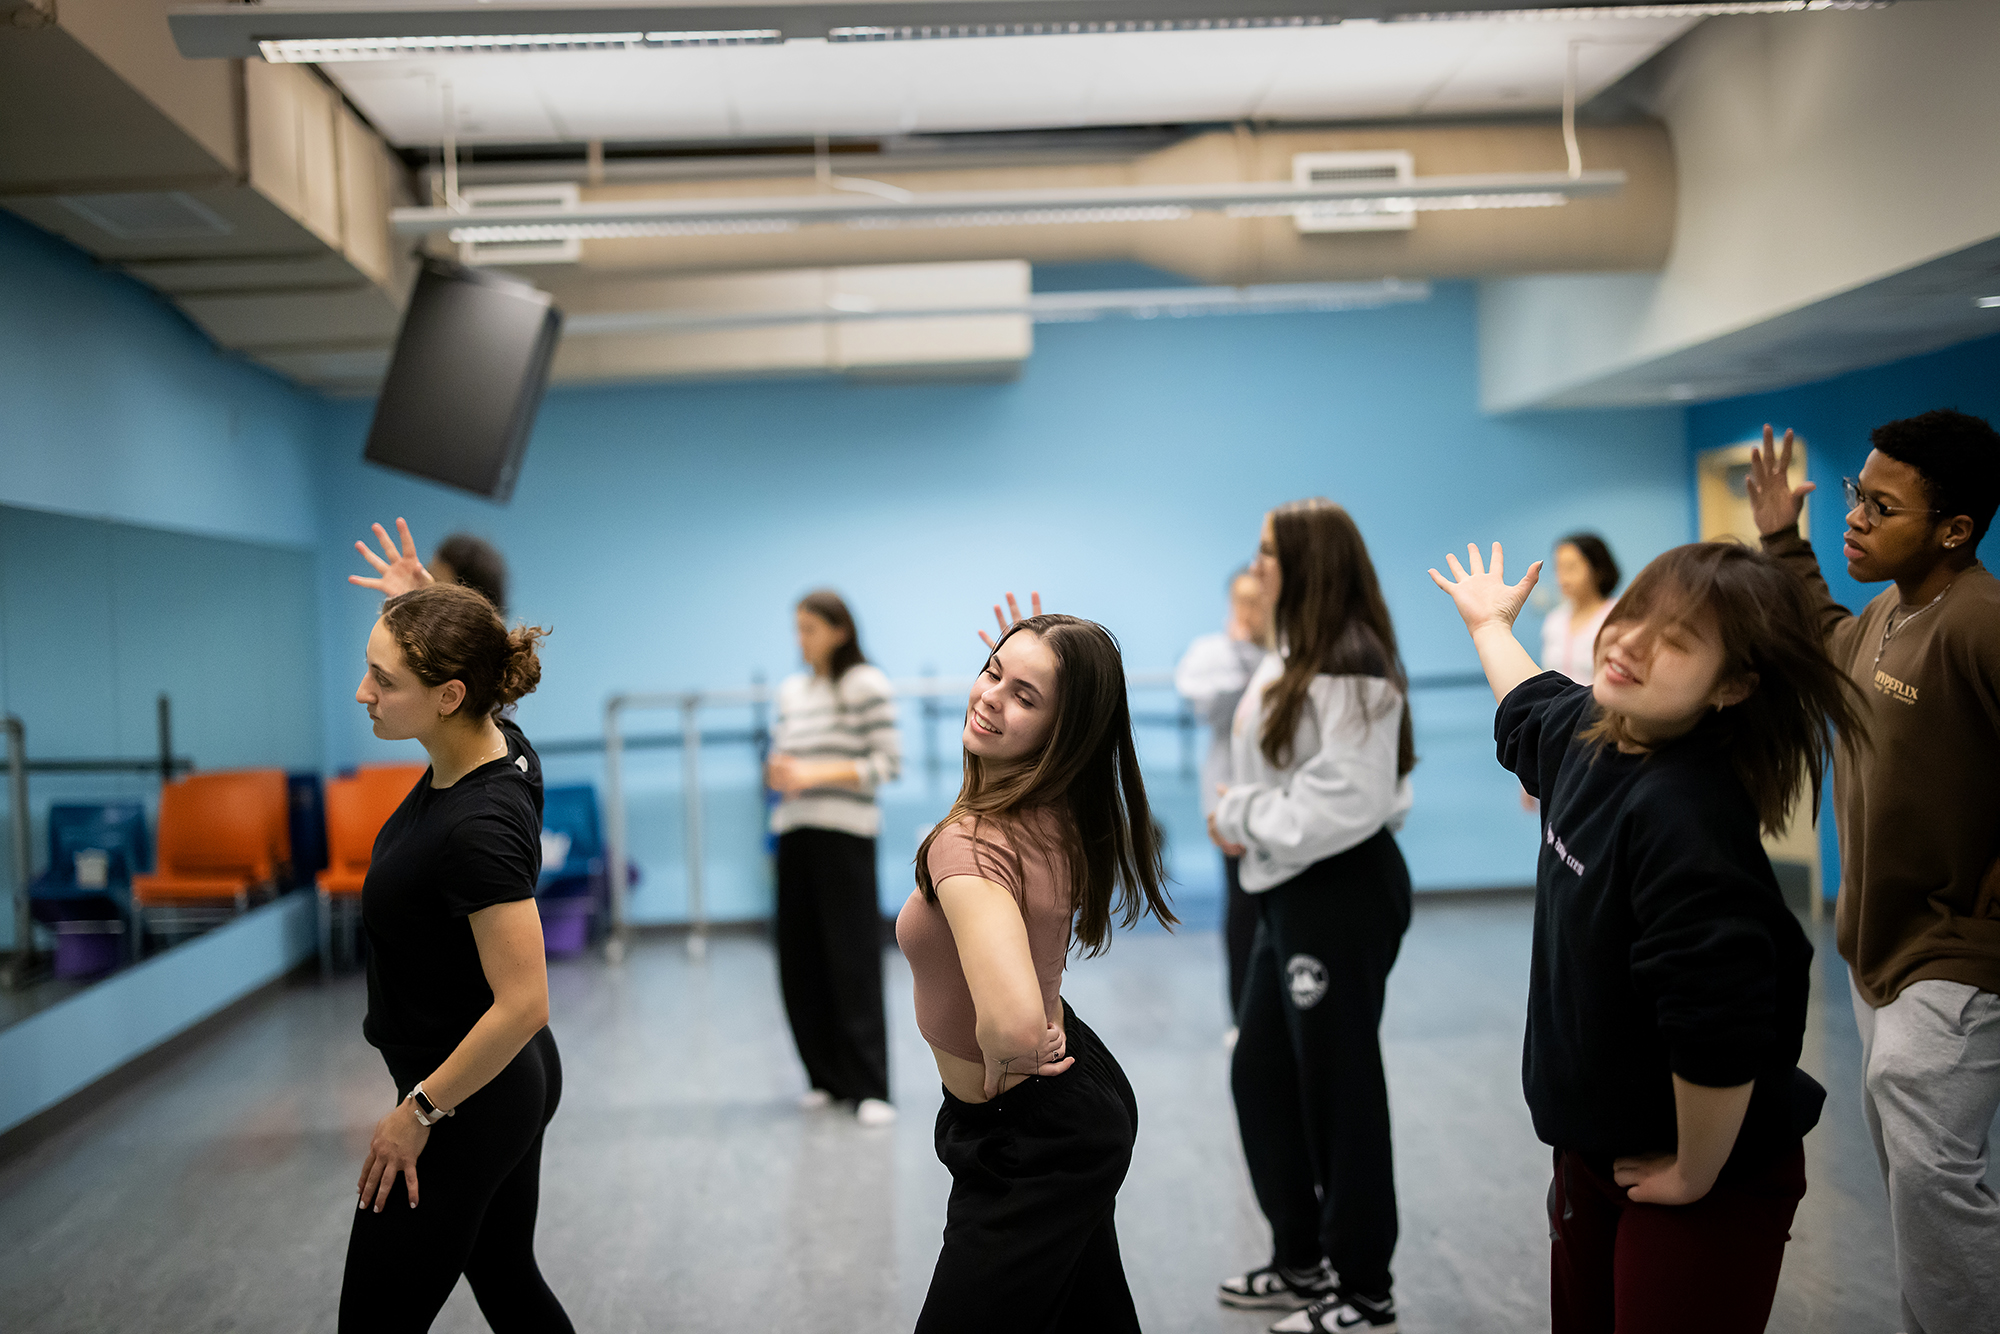 Members of a Penn performing arts group rehearsing in a studio.